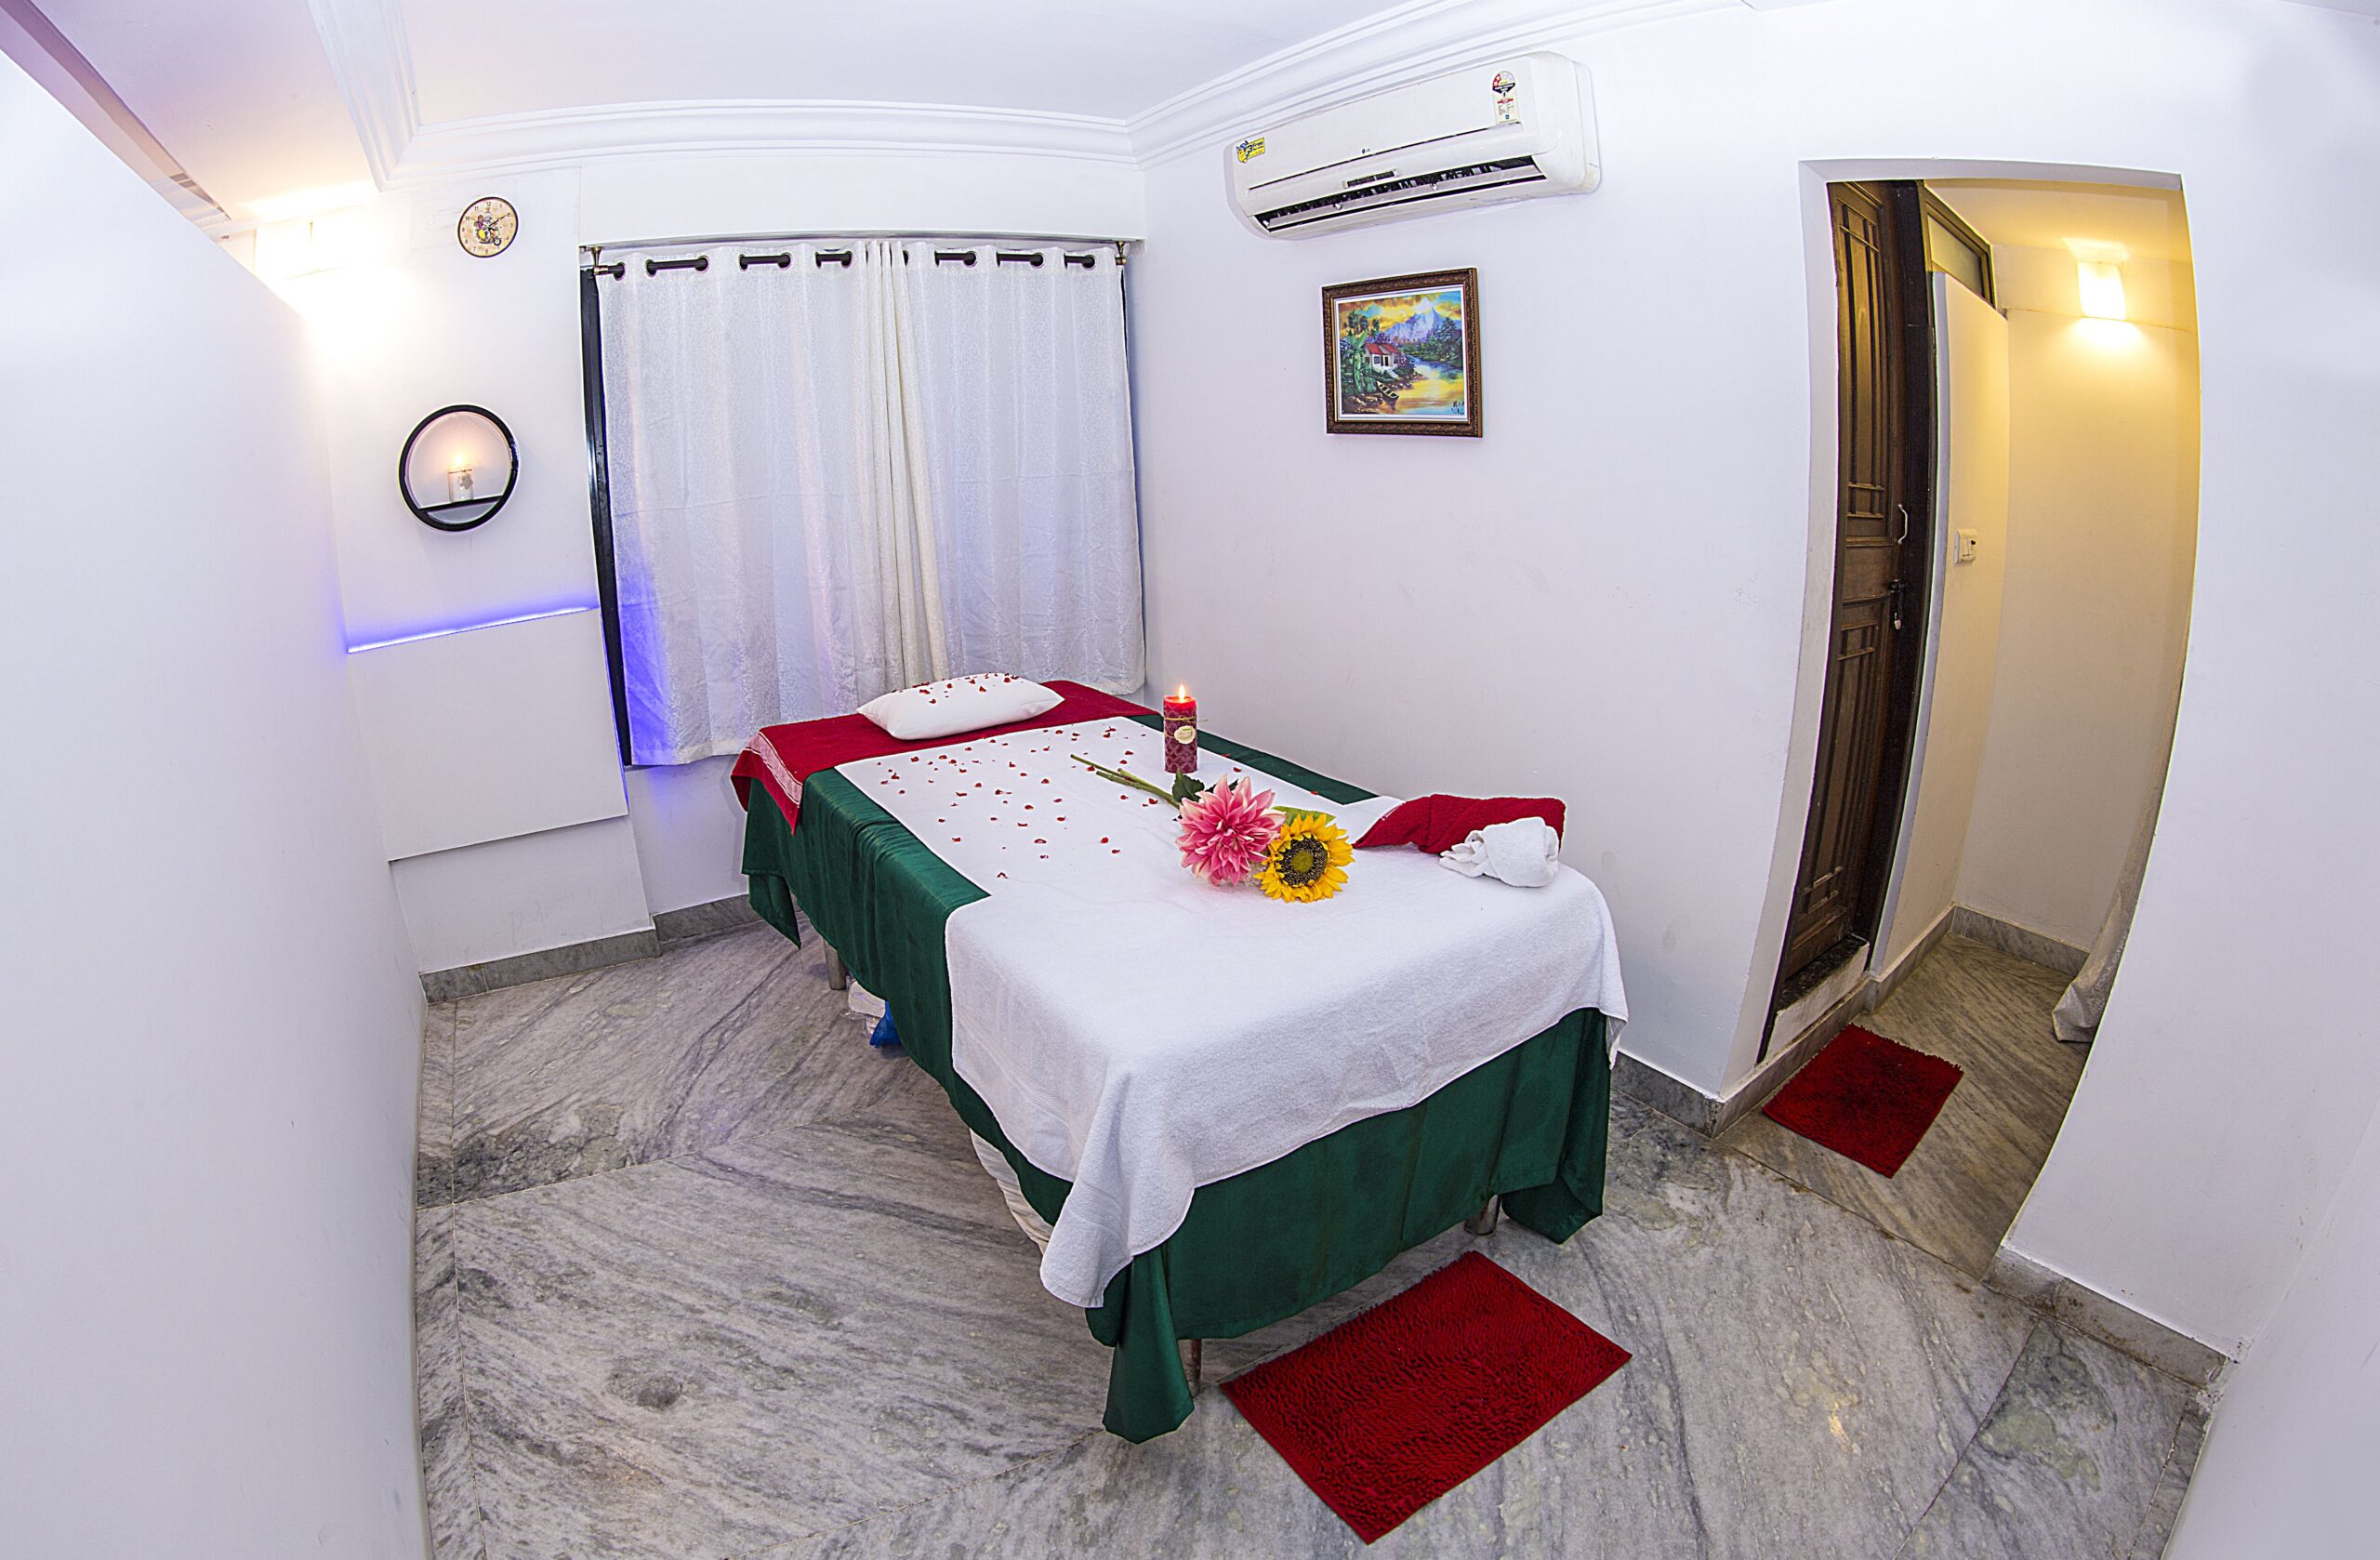 The full view of the air-conditioned room in the saloon with a comfortable bed, pillow and towels rolled into it. The room is lightened up with mild light arrangements and neat curtains. Aromatic candles are lit up on the bed and the wall for the freshness in the room. Washroom facilities are also attached for customers comfort.